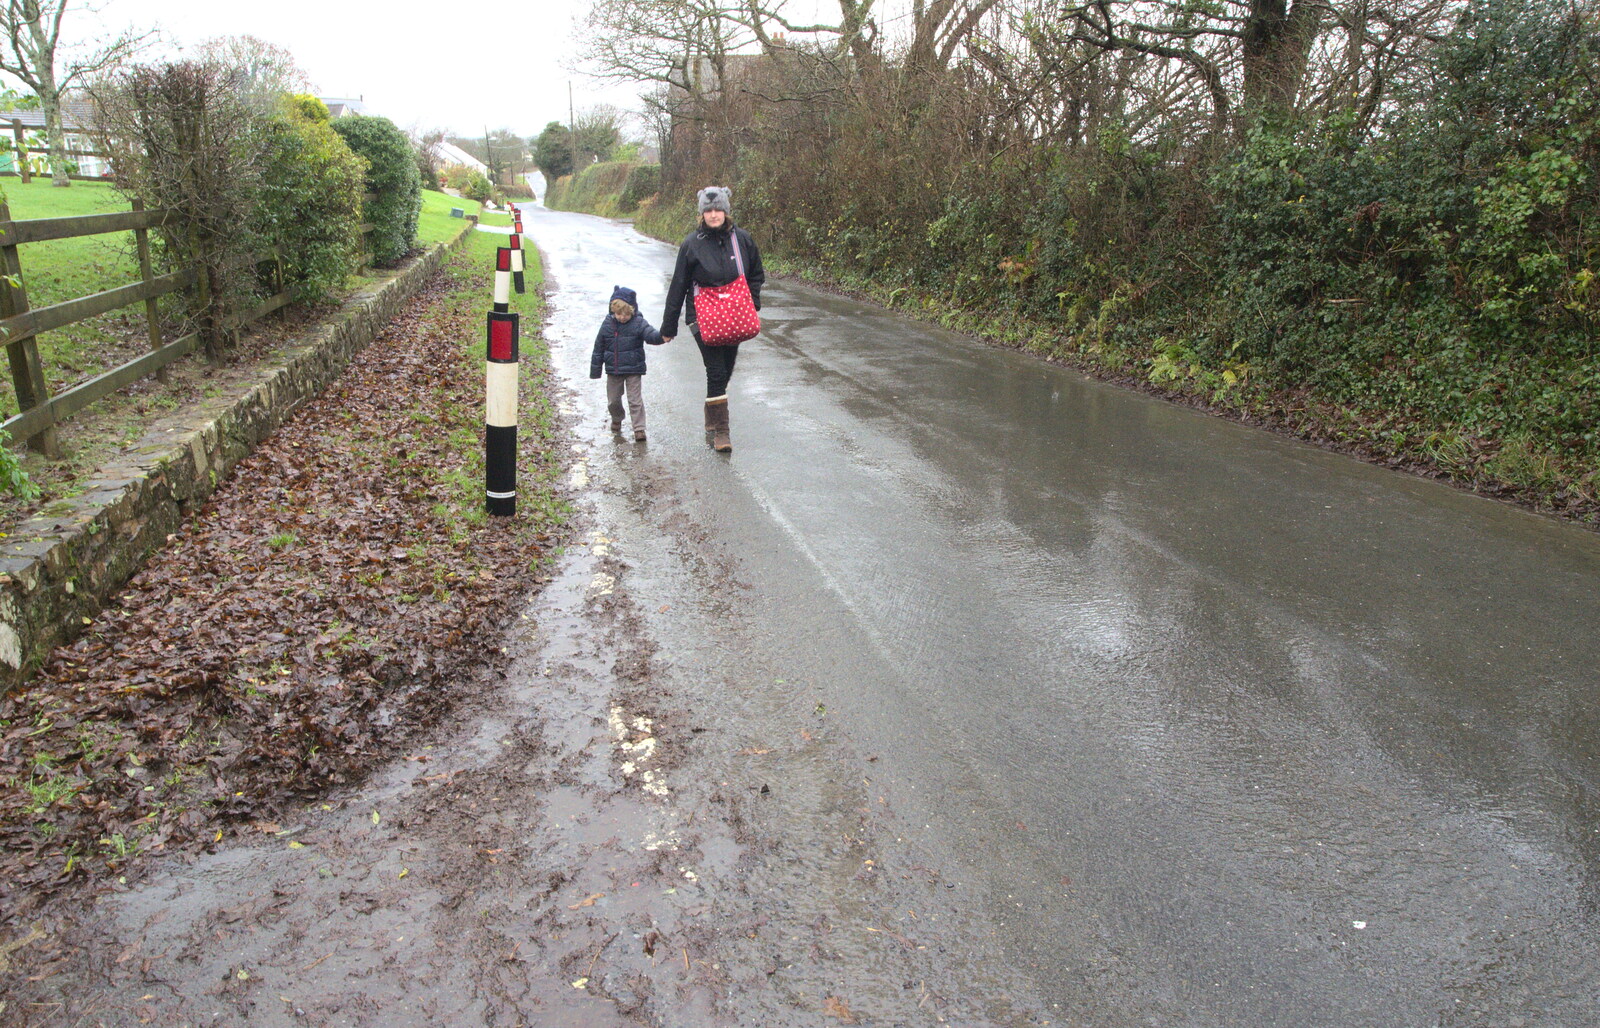 Fred and Isobel walk up the road to Spreyton from A Trip to Spreyton, Devon - 24th December 2012